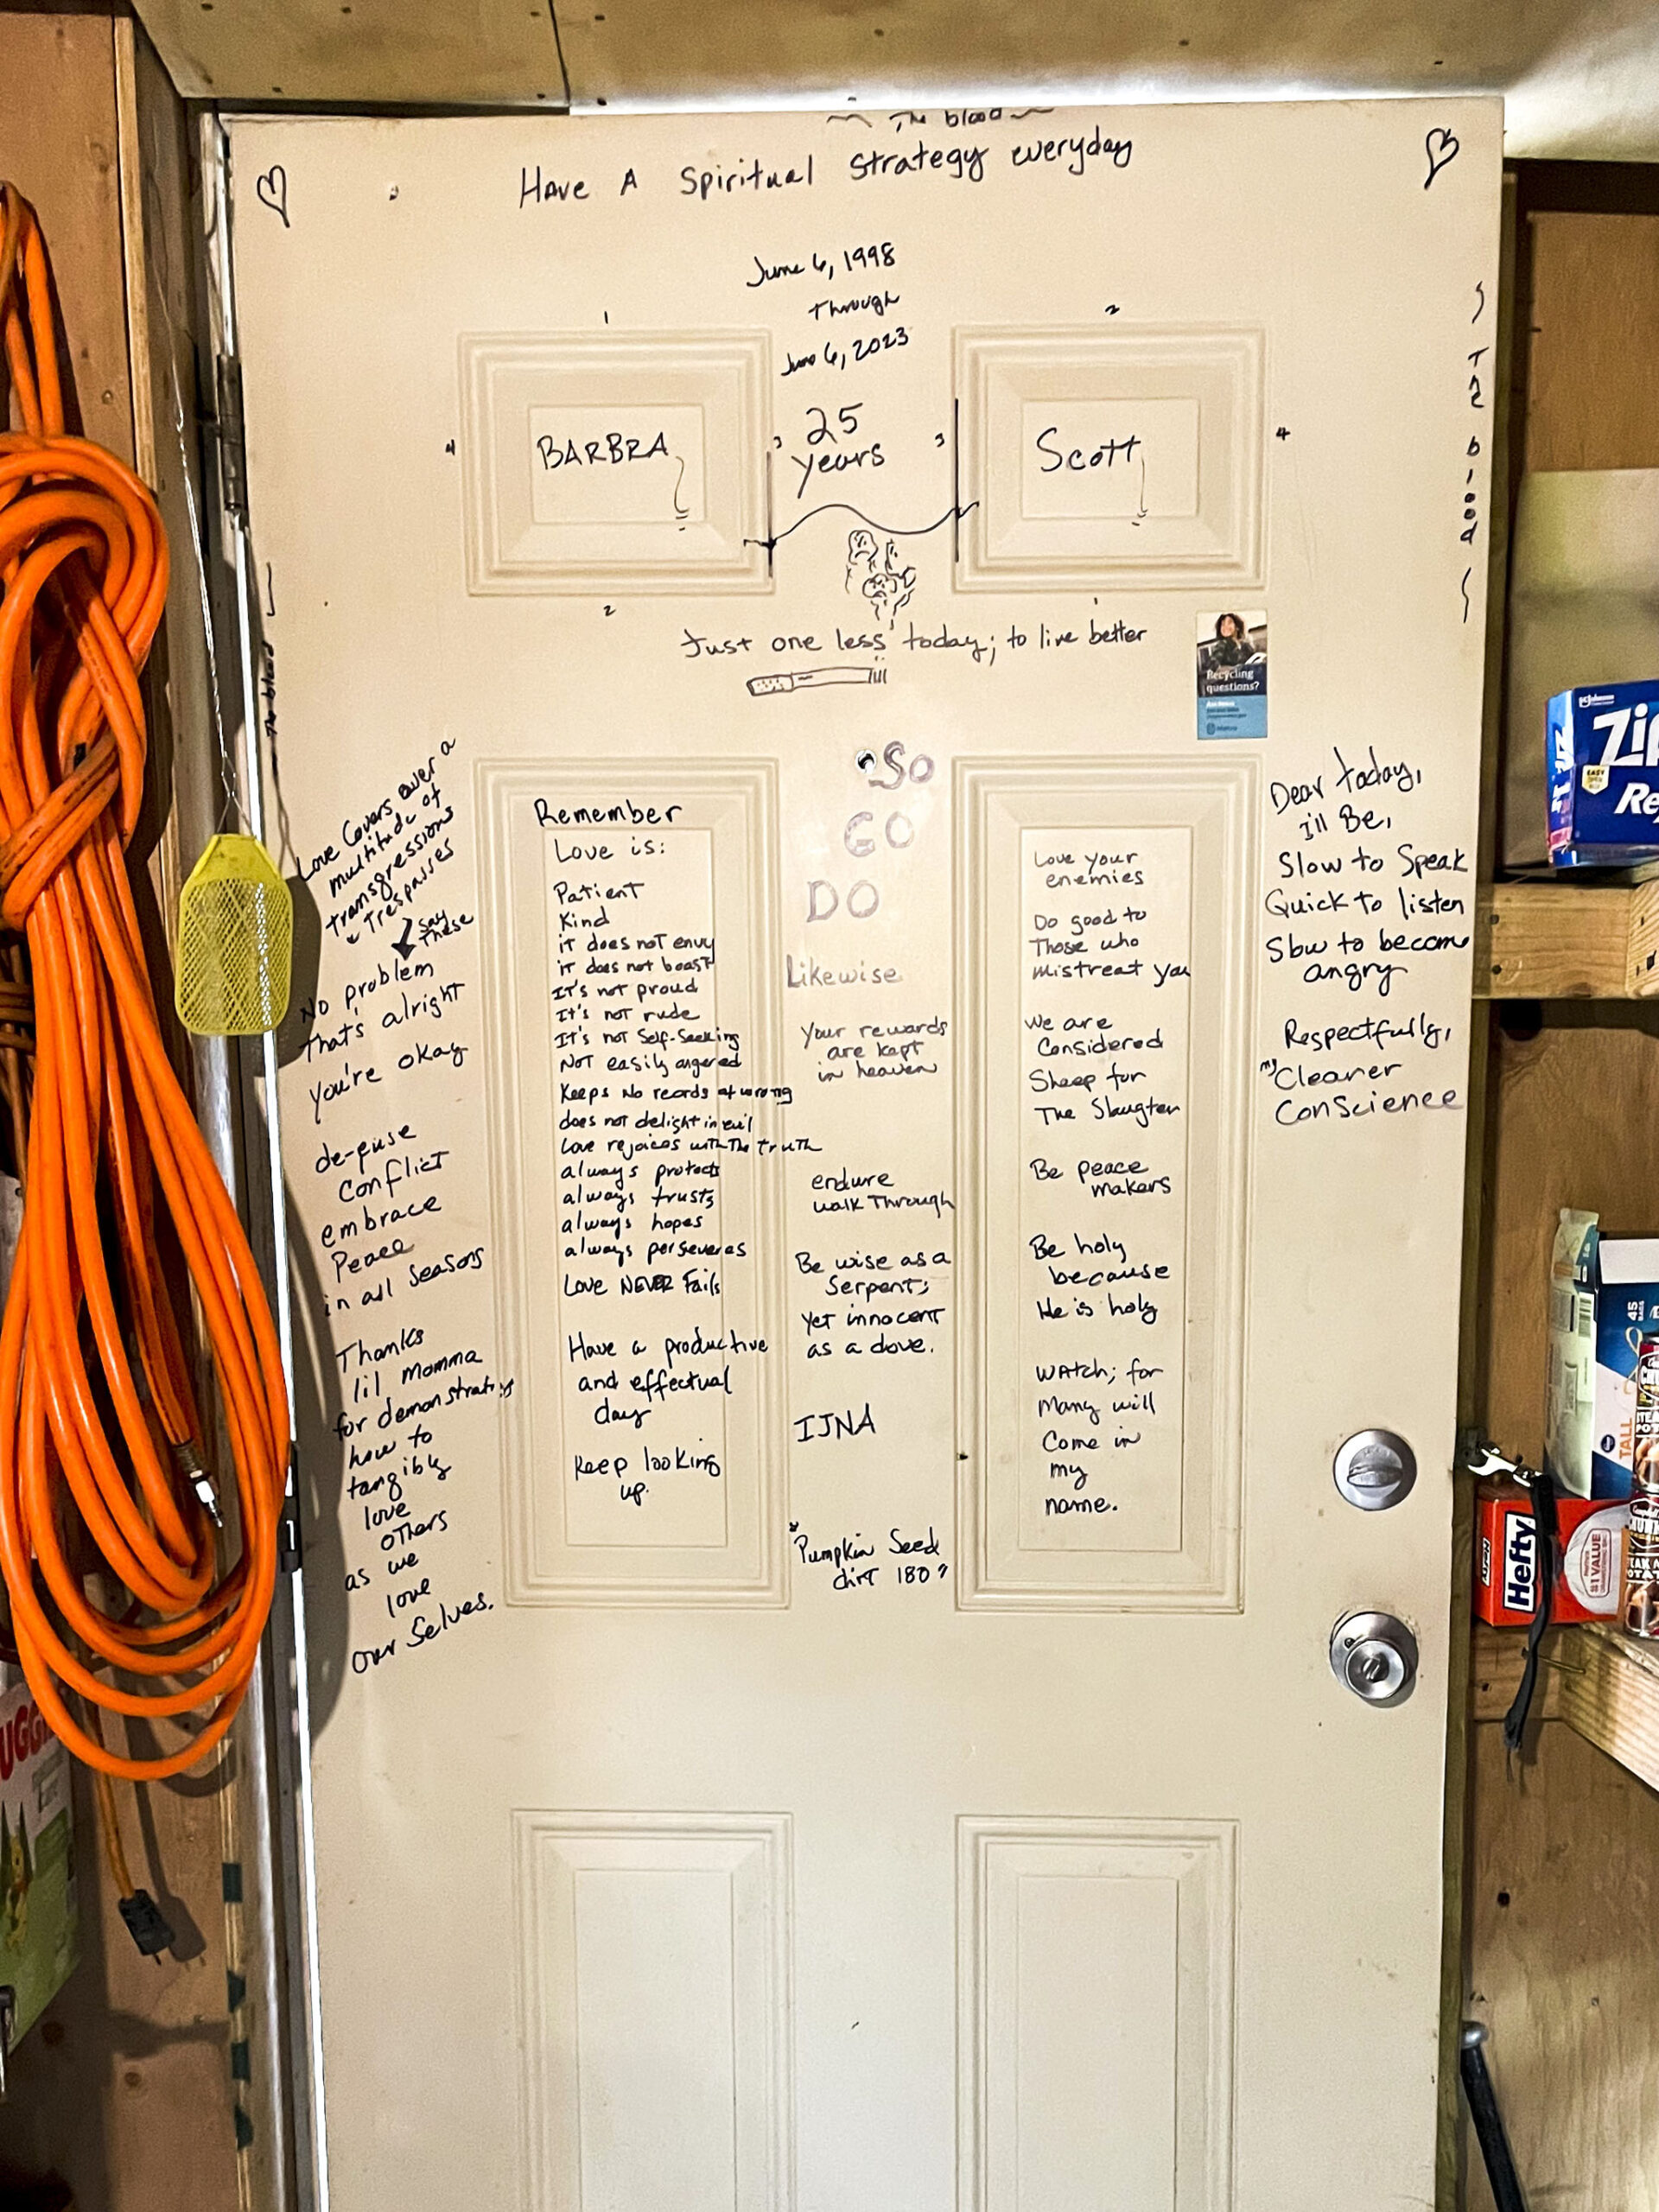 The inside of Barbra and her husband Scott Weber’s front door is inscribed with various apothems and values, as well as their names and a line with the words “25 years” written on top in blue marker. One section reads “Love covers over a multitude of transgressions and trespasses.”